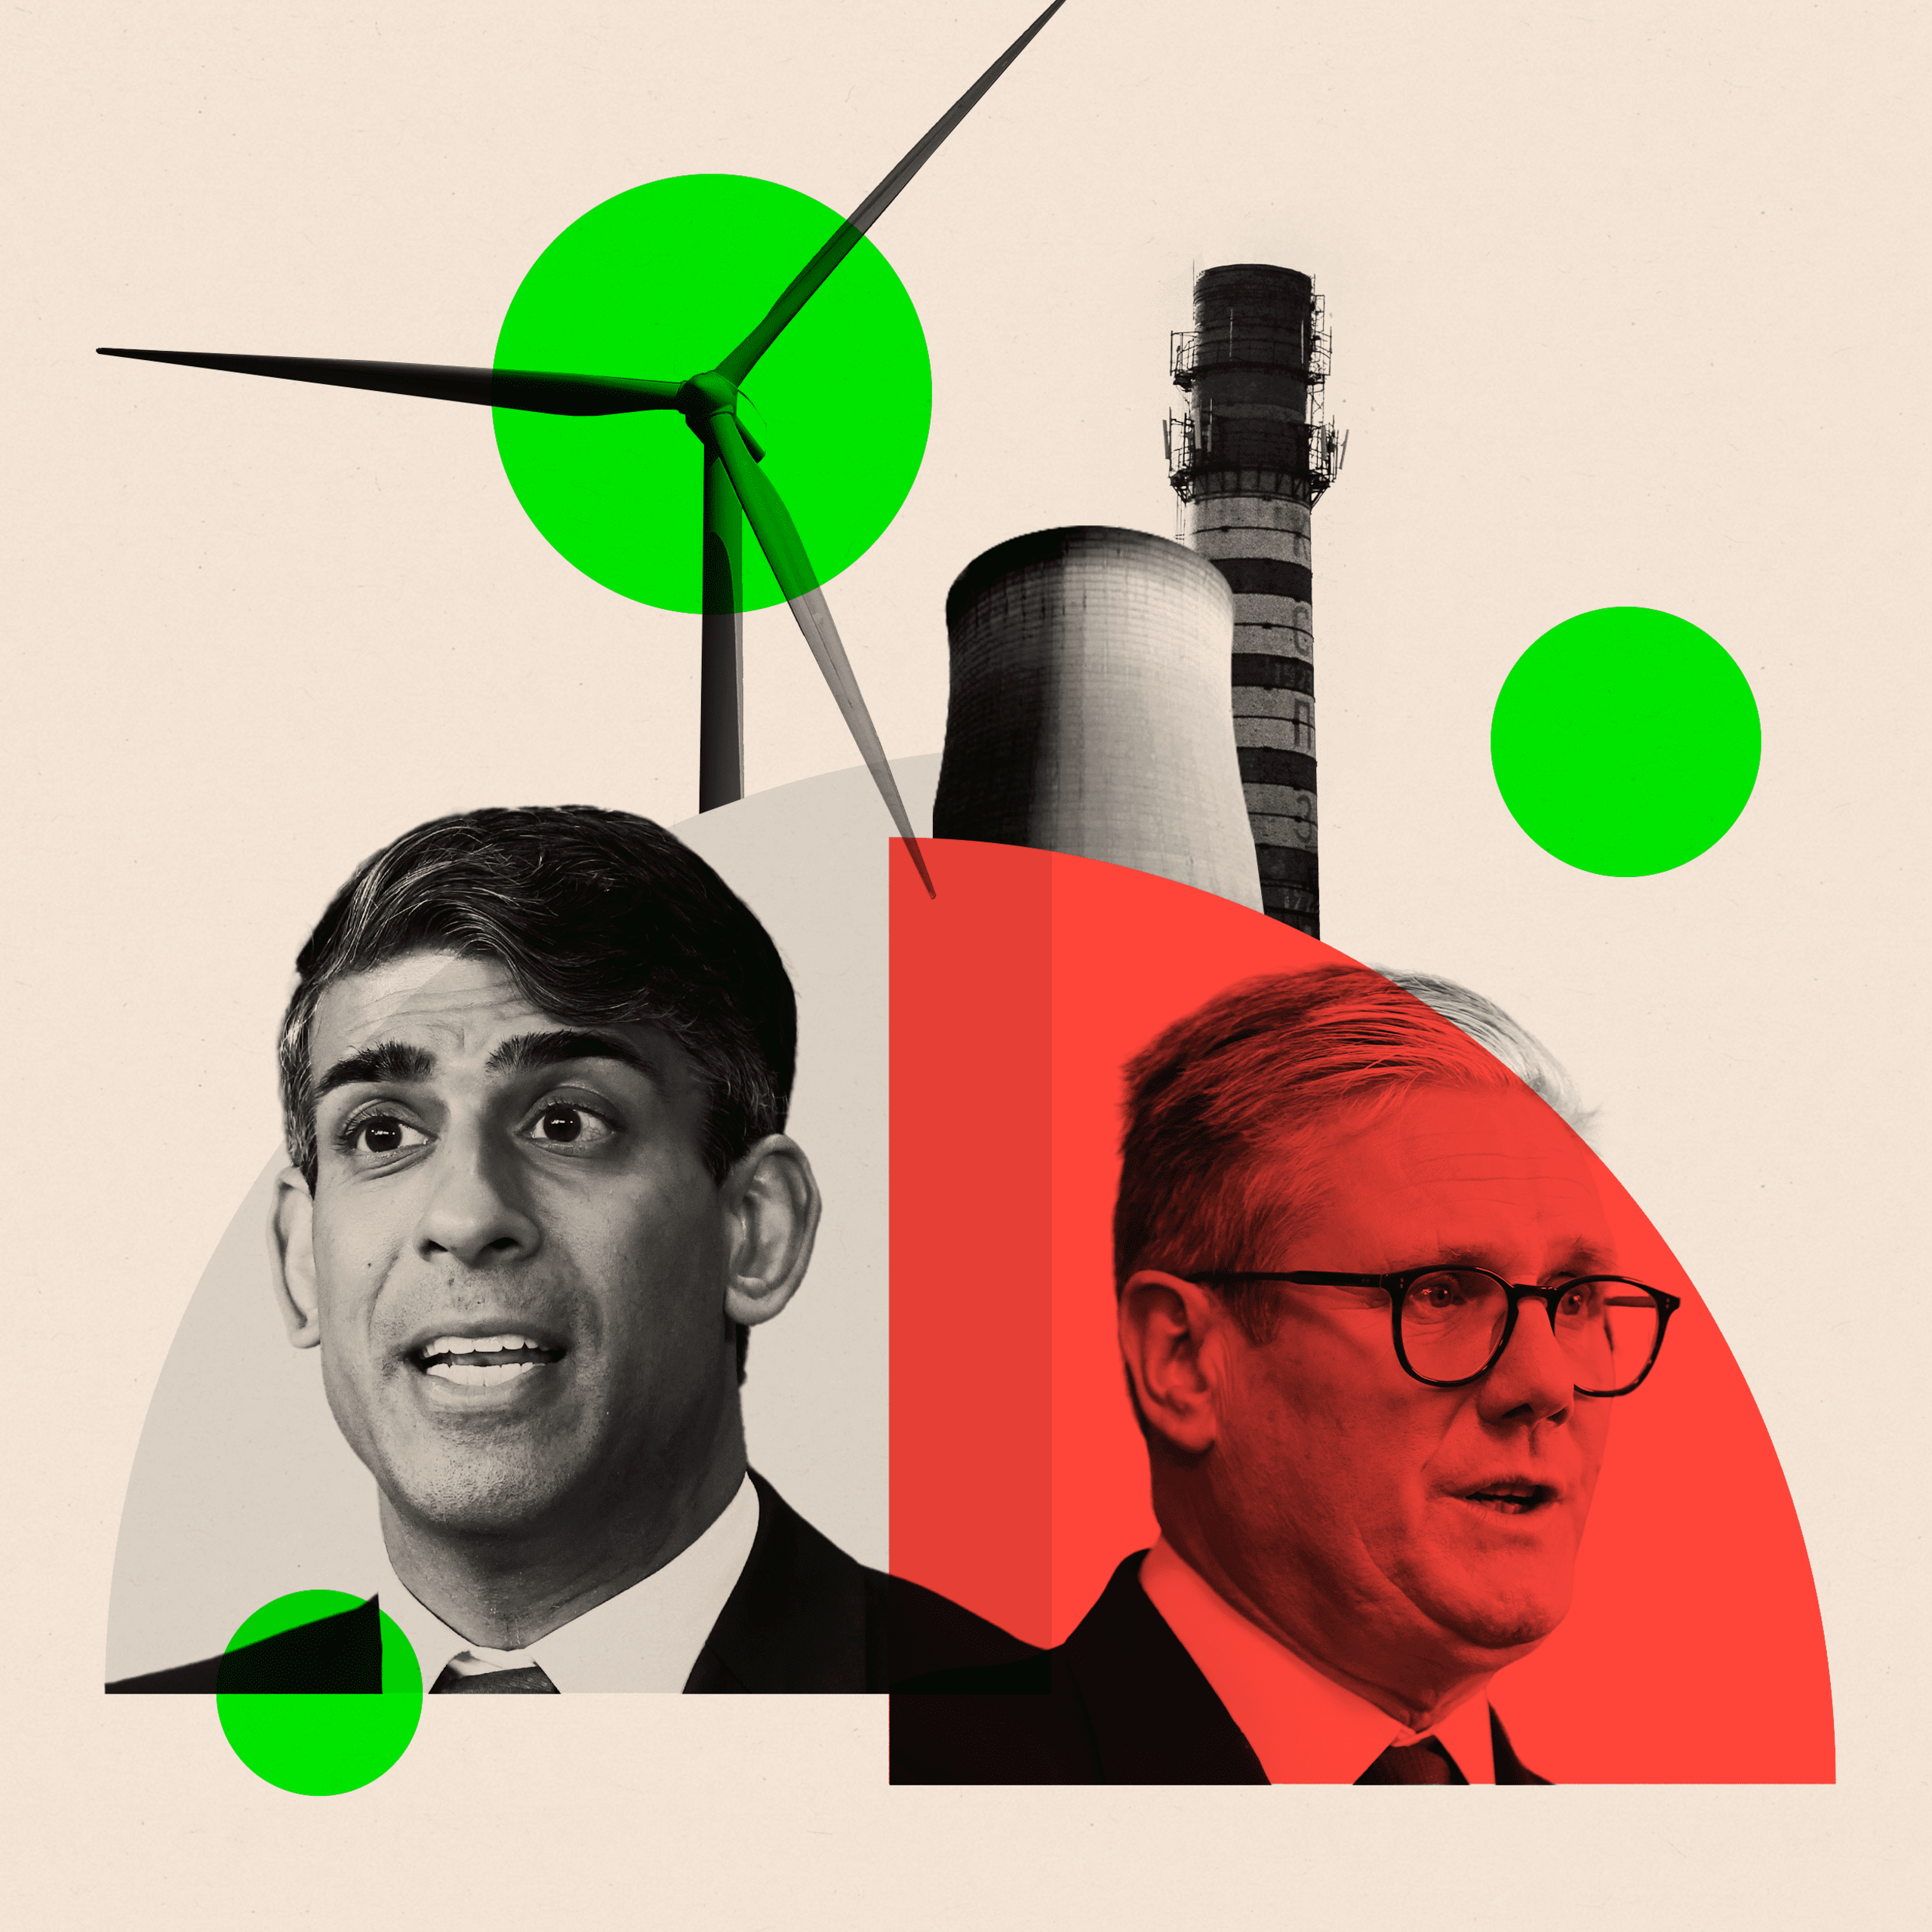 Montage showing Rishi Sunak and Sir Keir Starmer next to chimneys and a wind turbine